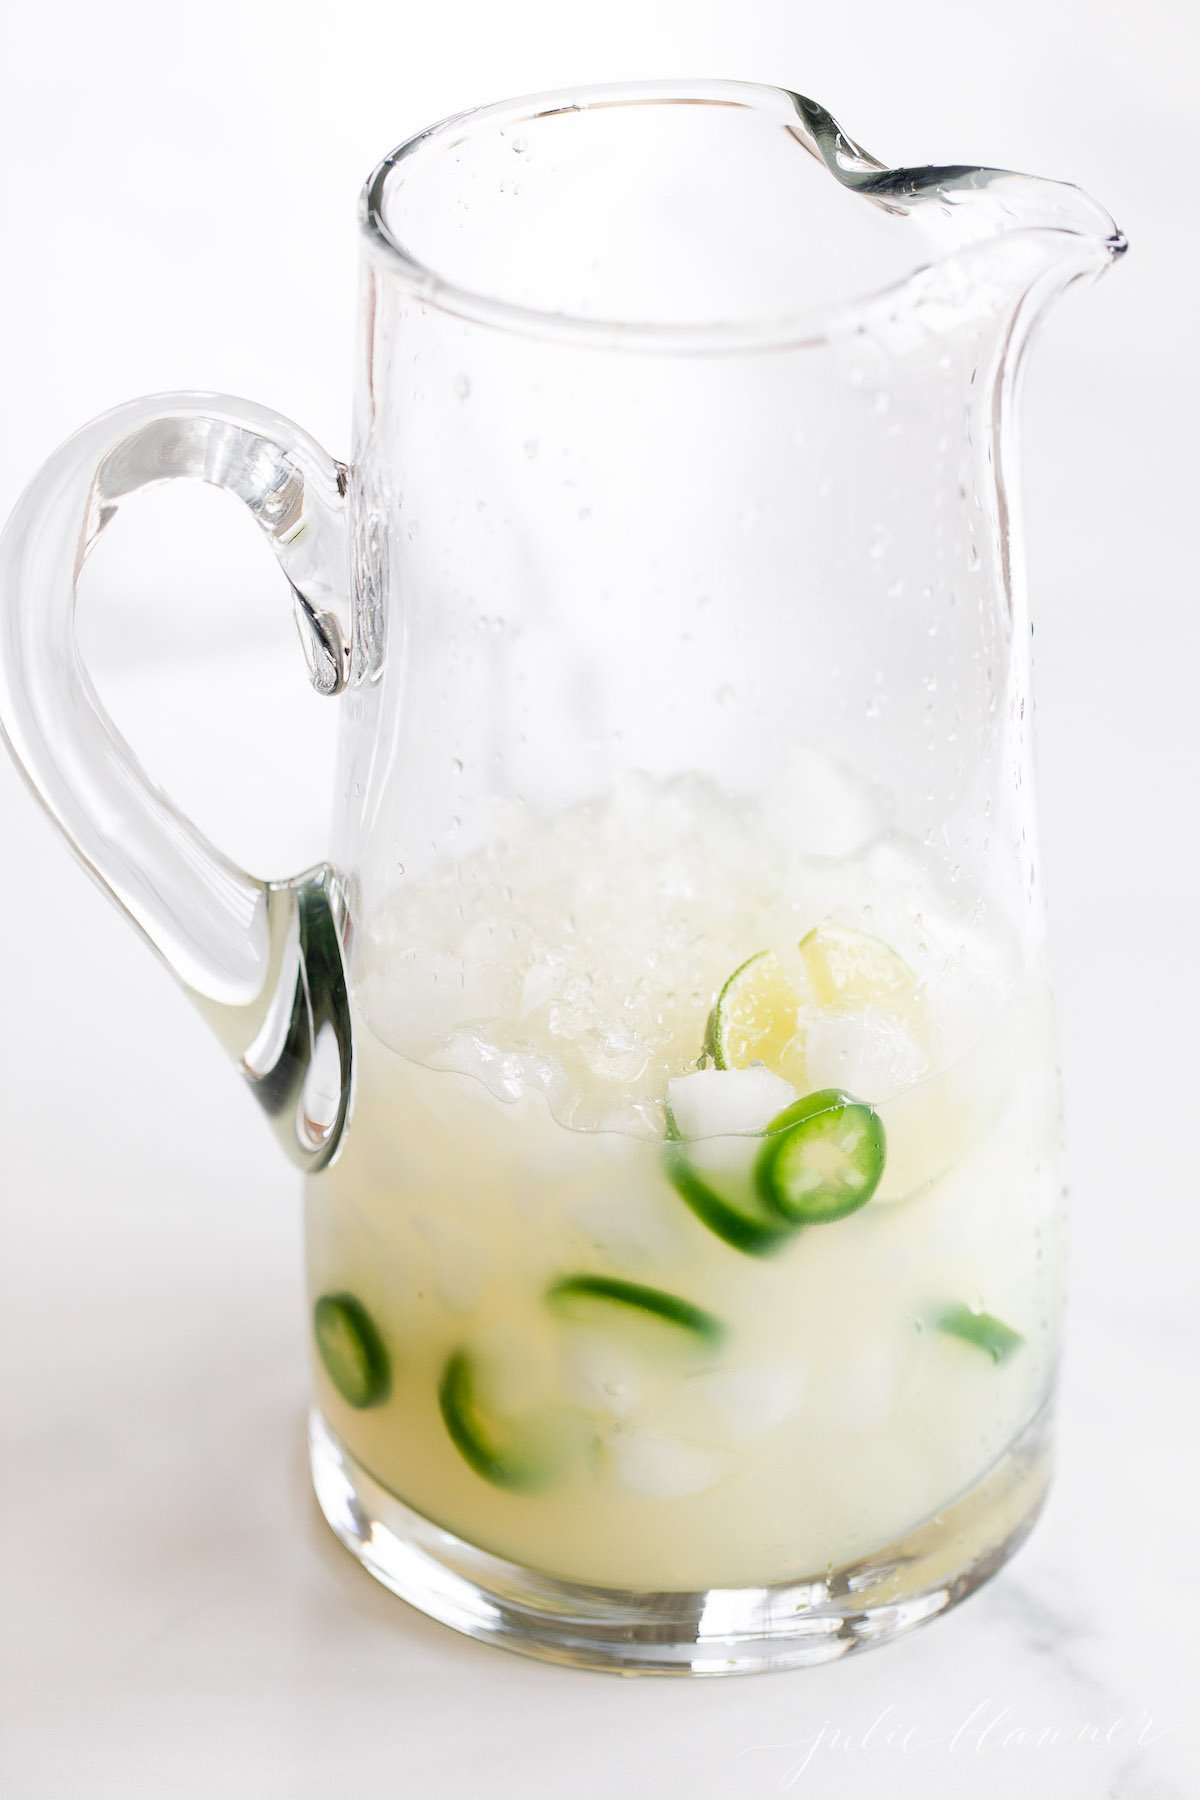 A pitcher filled with ice and jalapeños, perfect for making a spicy Jalapeño Margarita.